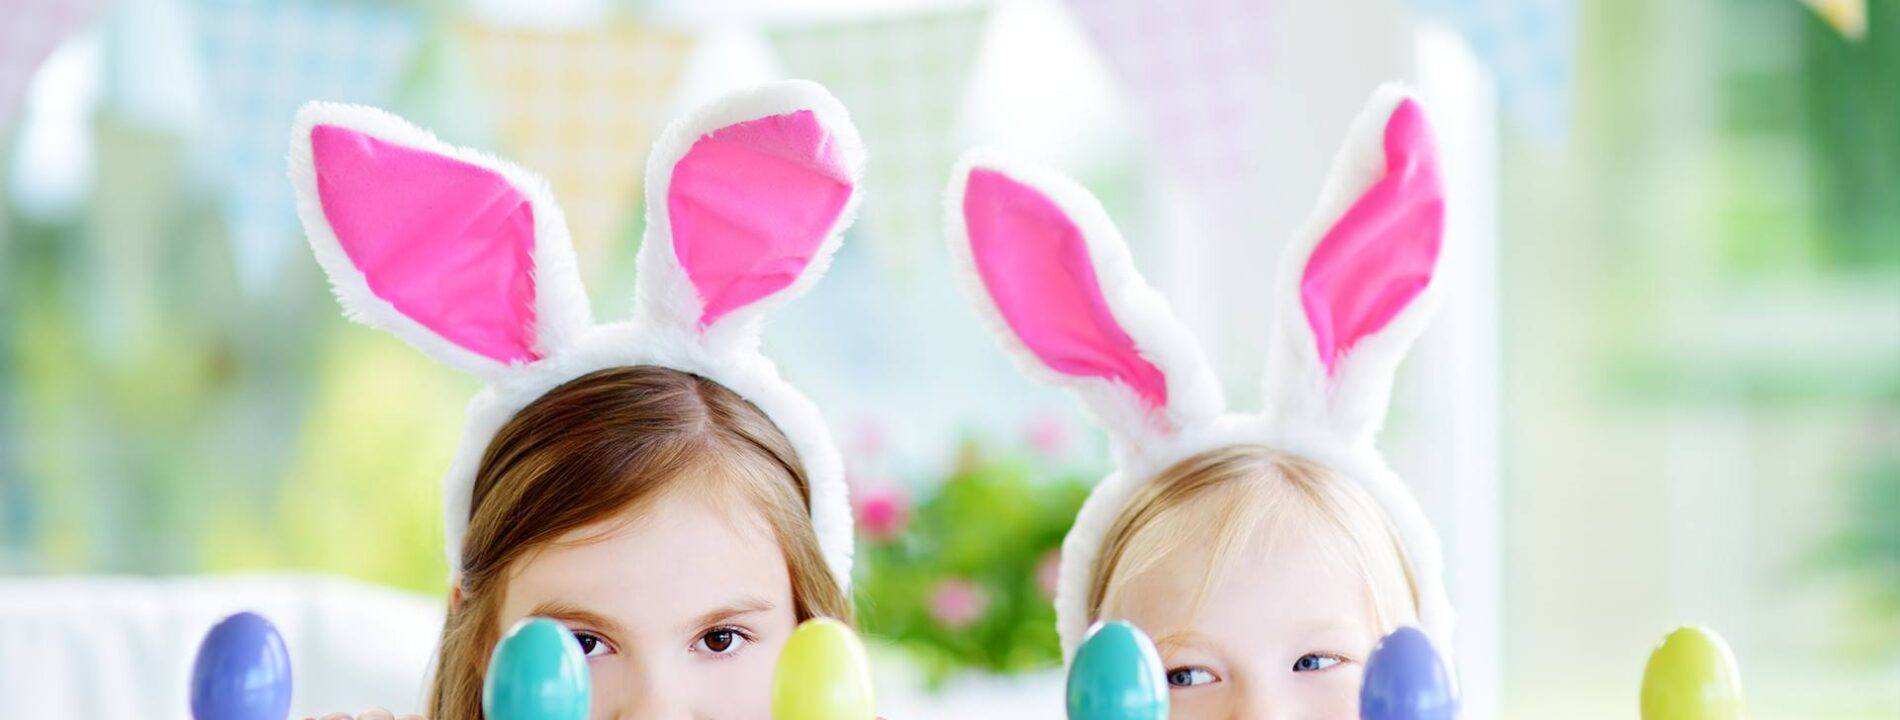 Easter games and traditions